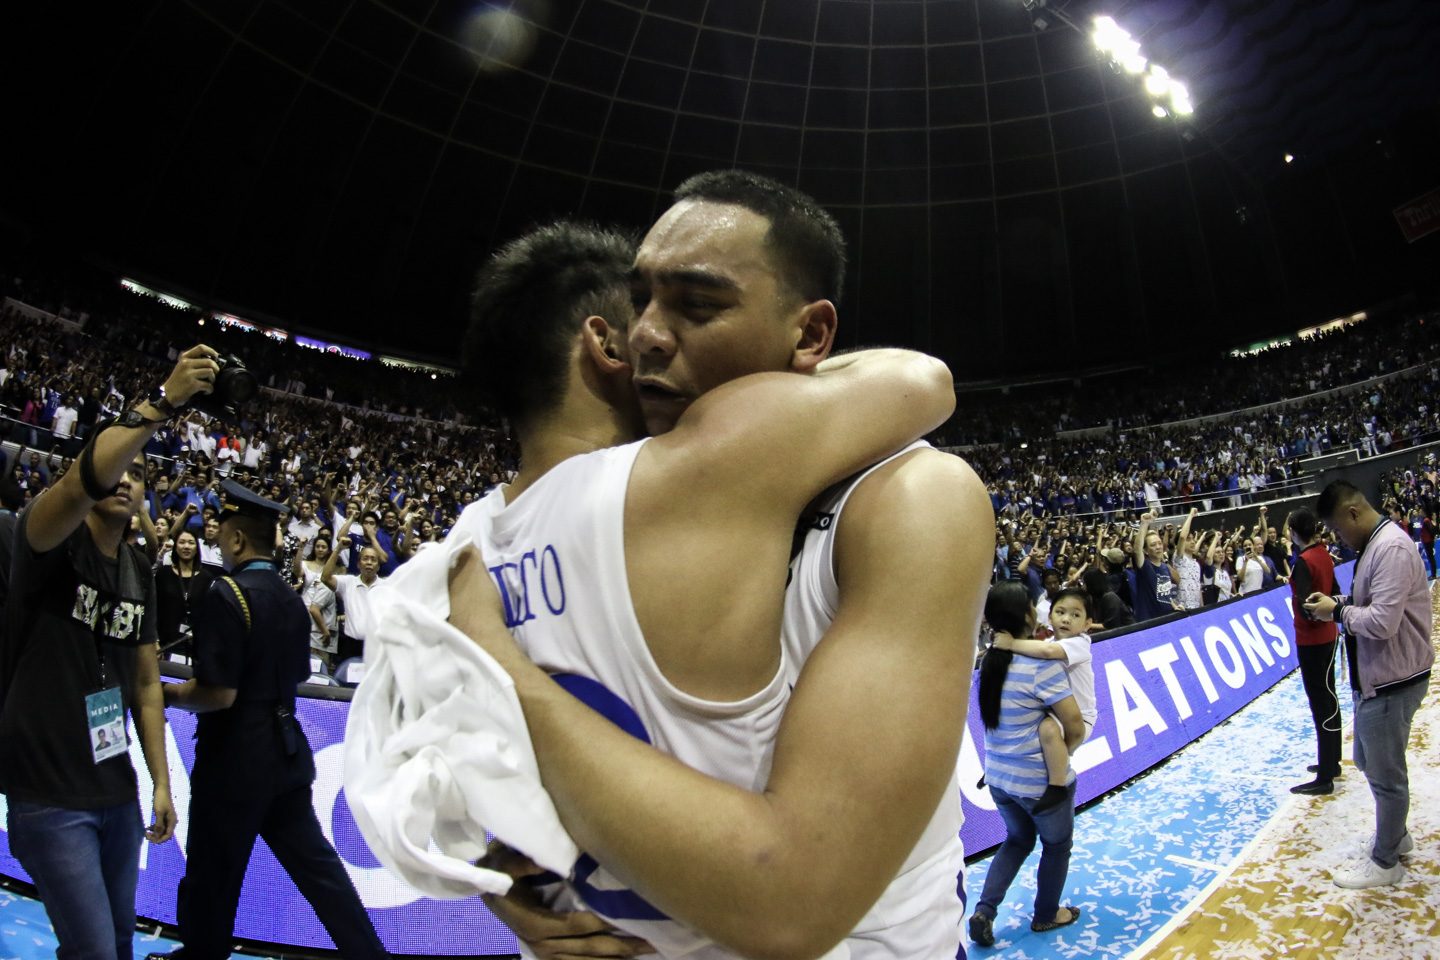 Ateneo captain Vince Tolentino fulfills dream he chased for so long